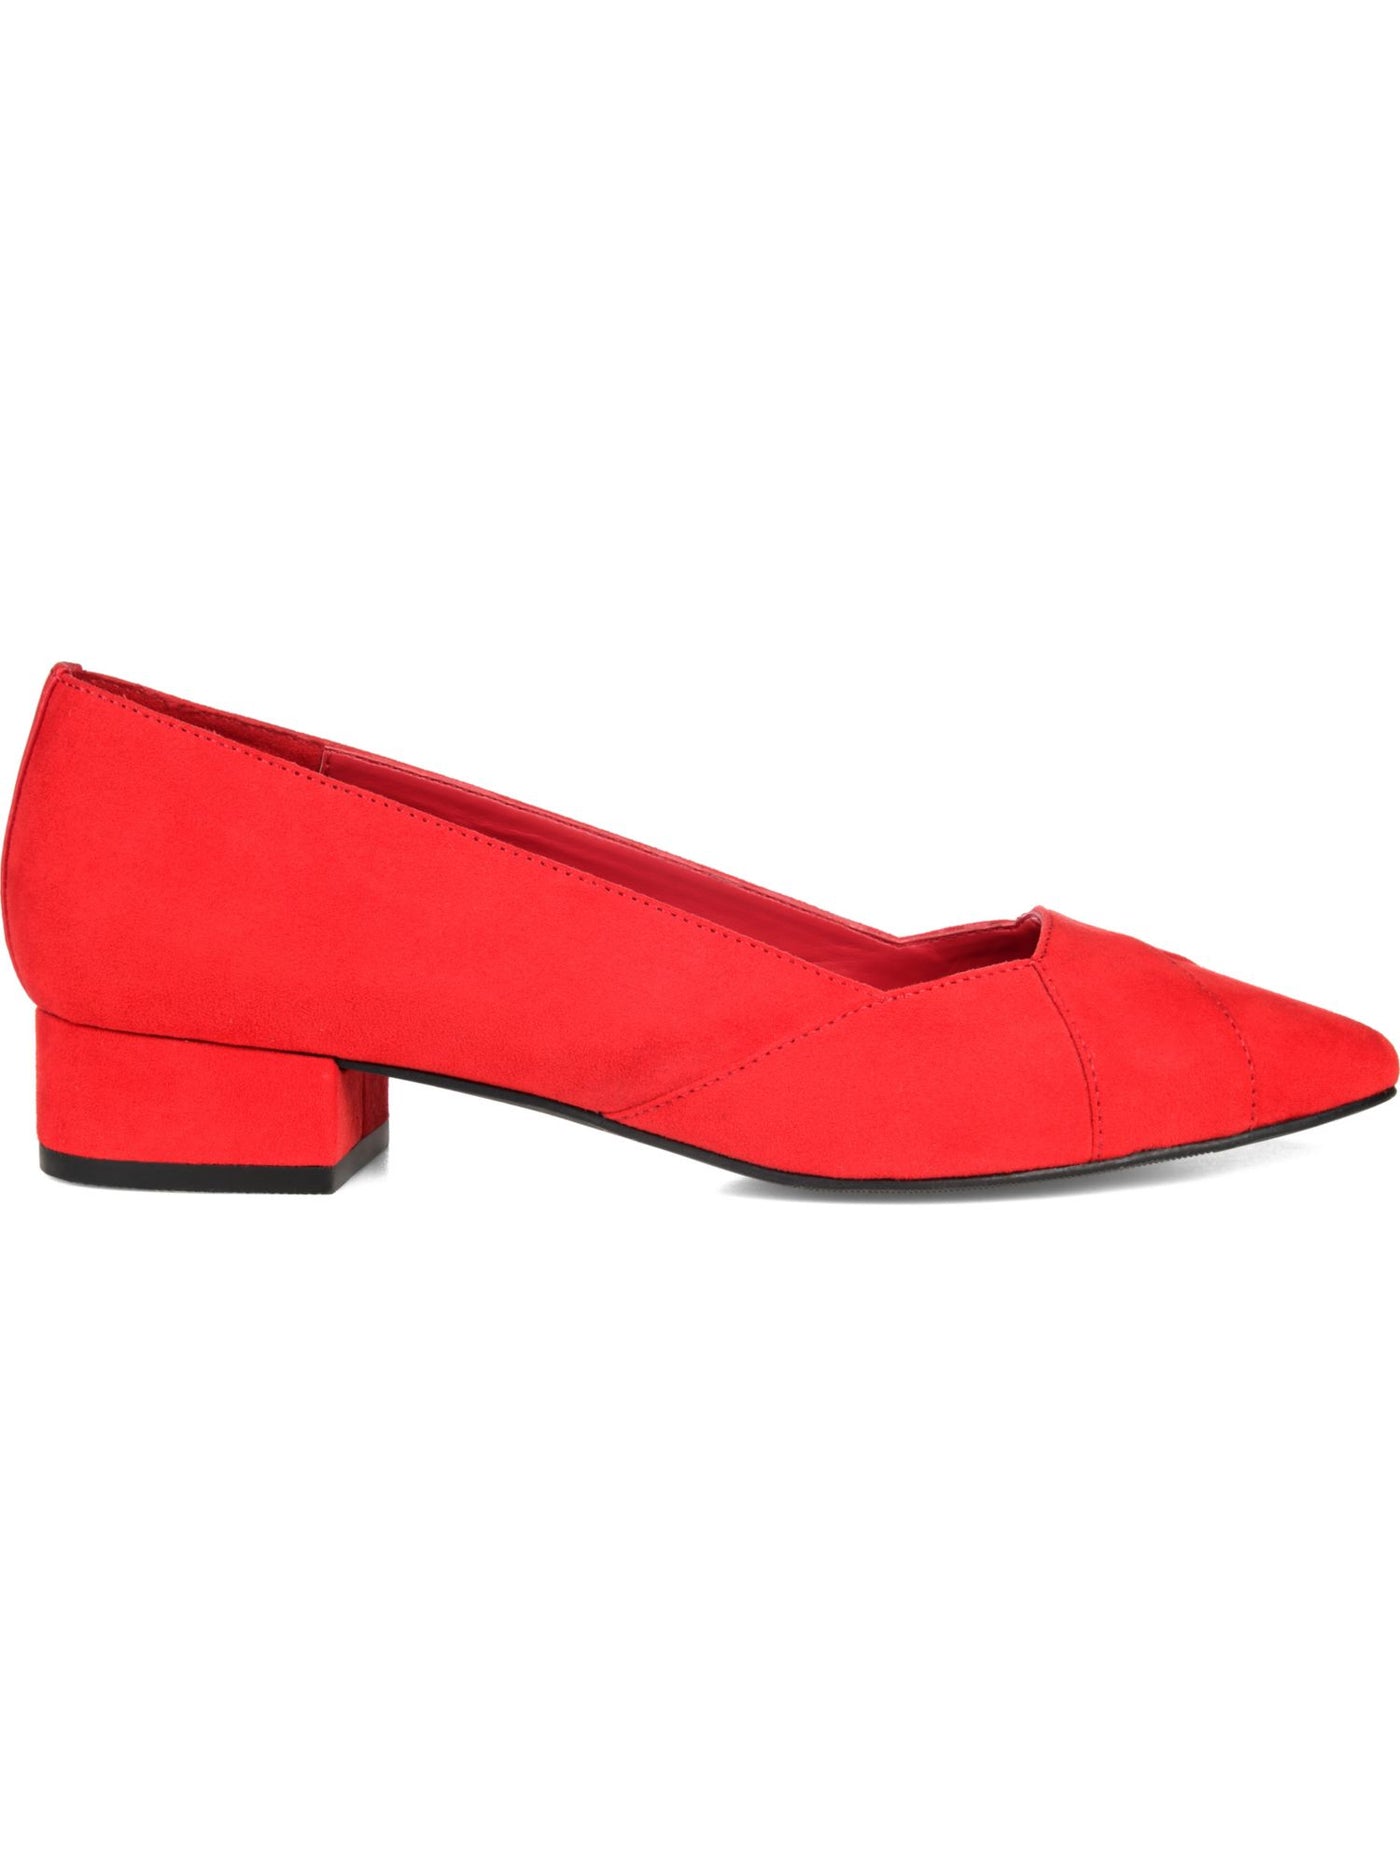 JOURNEE COLLECTION Womens Red Comfort Justine Pointed Toe Block Heel Slip On Heeled Loafers 8 M